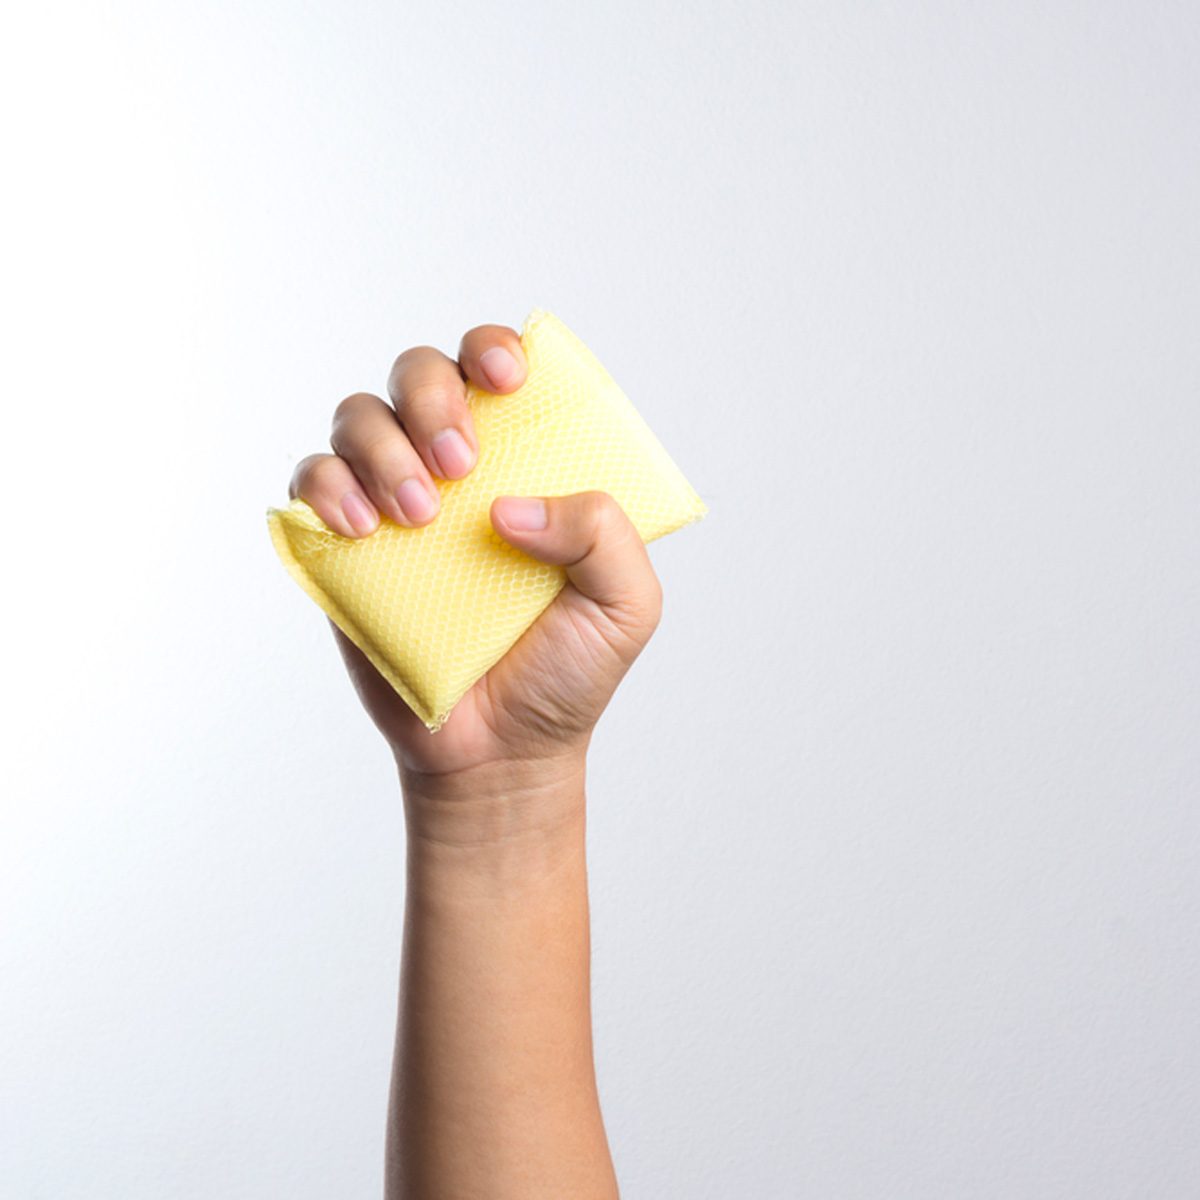 how to clean your sponge